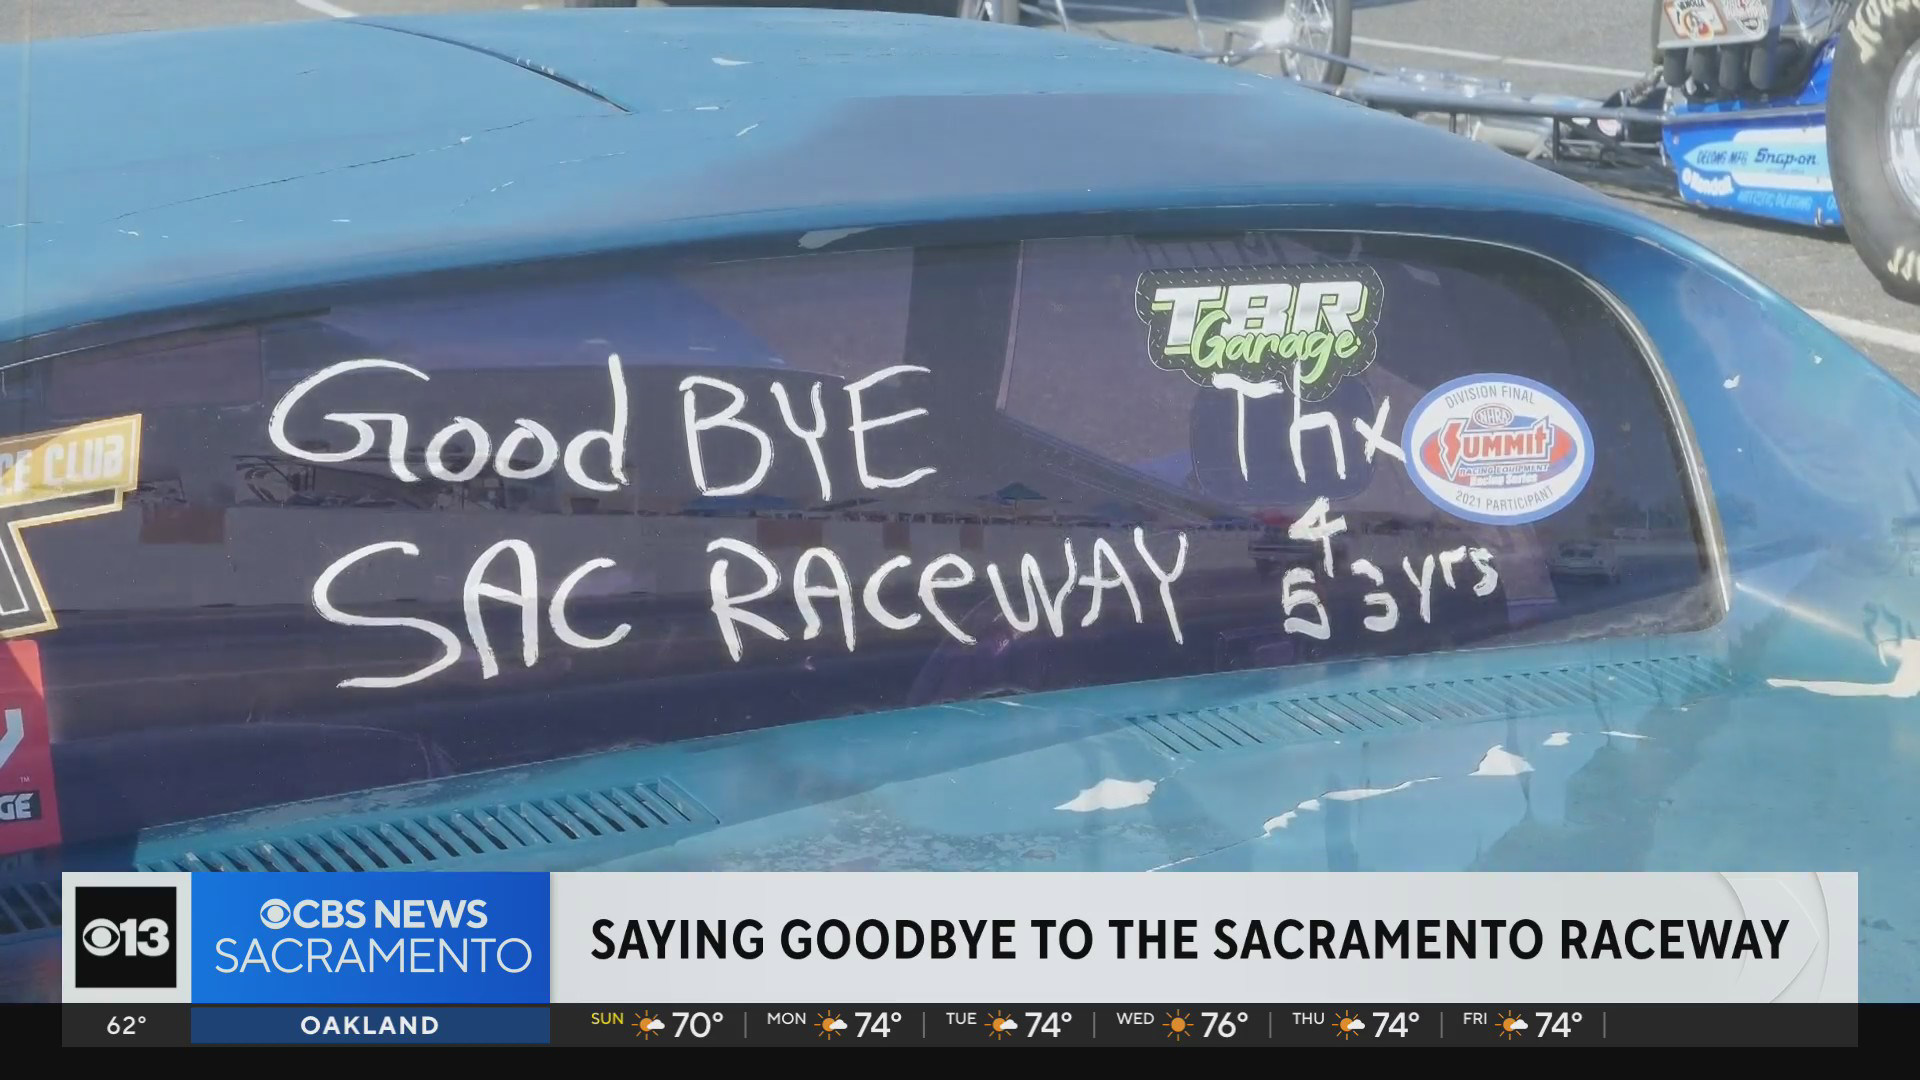 Sacramento Raceway held its final Governor's Cup after being open 50+ years